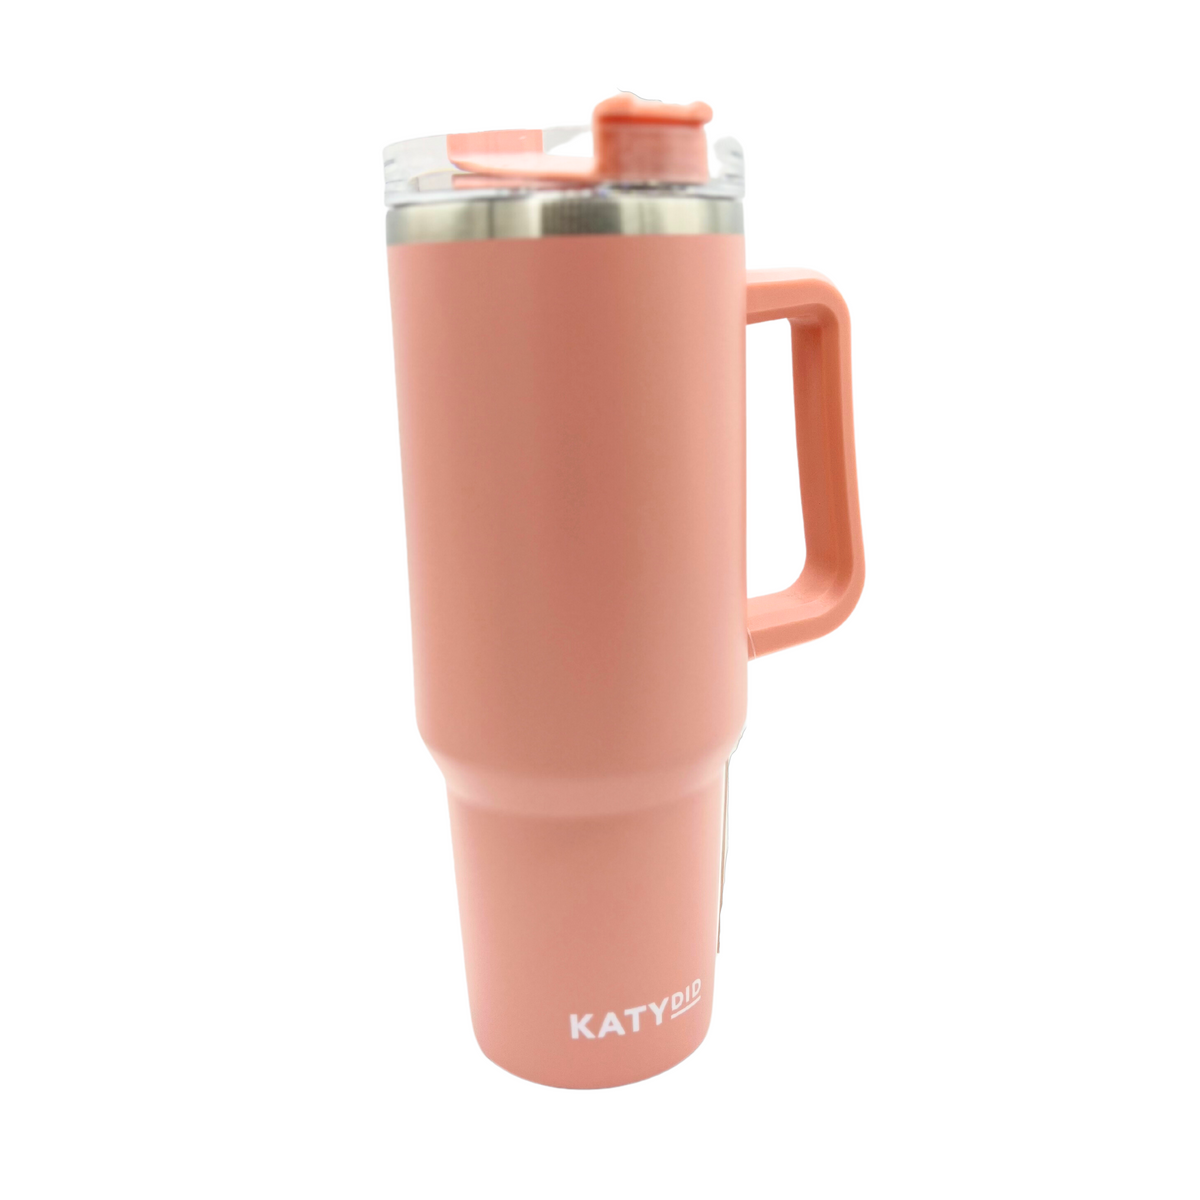 Solid KatyDid Stainless Steel Tumbler Cups – The Pink Pearl Gift Shop